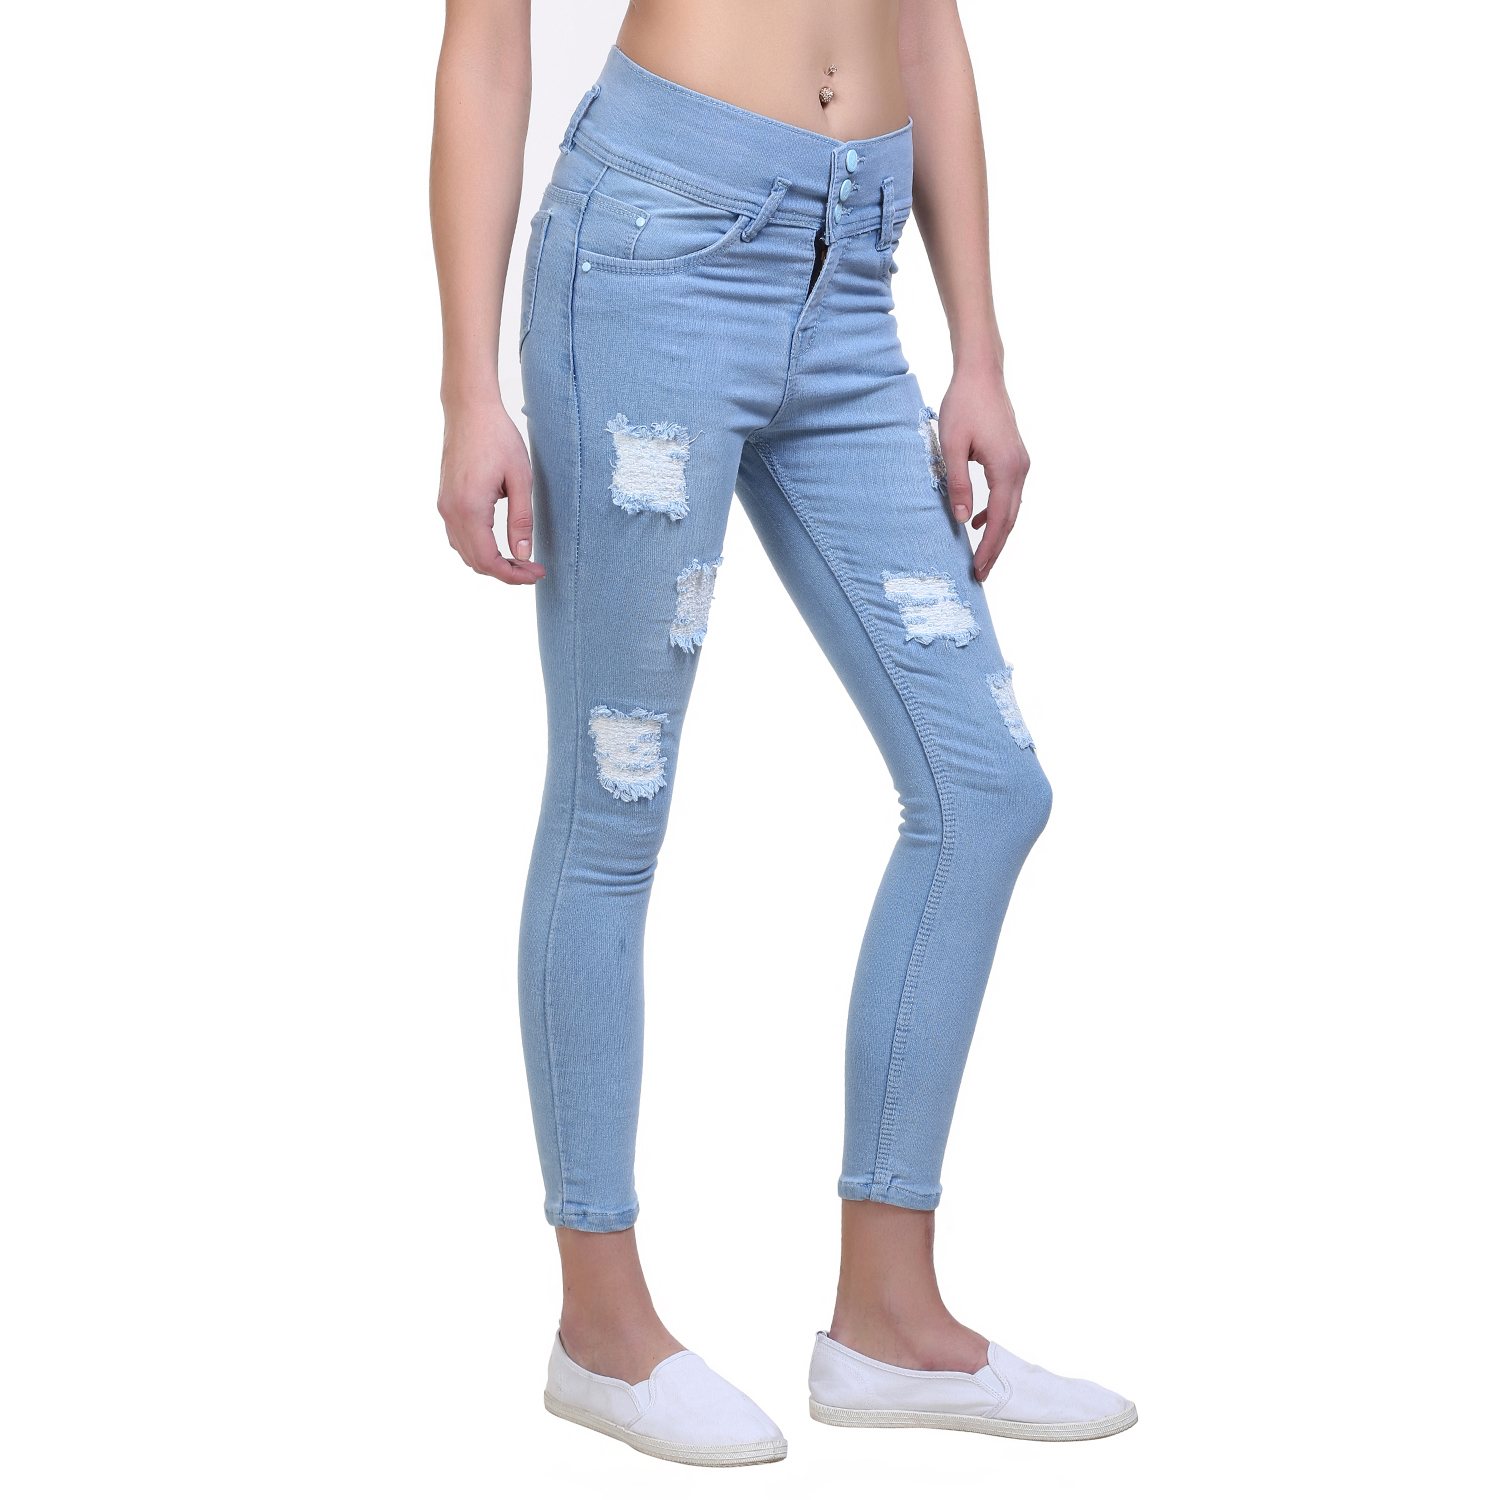 Buy Code Yellow Women's Icy Blue Color Stylish Ripped Mid-Waist Jeans ...